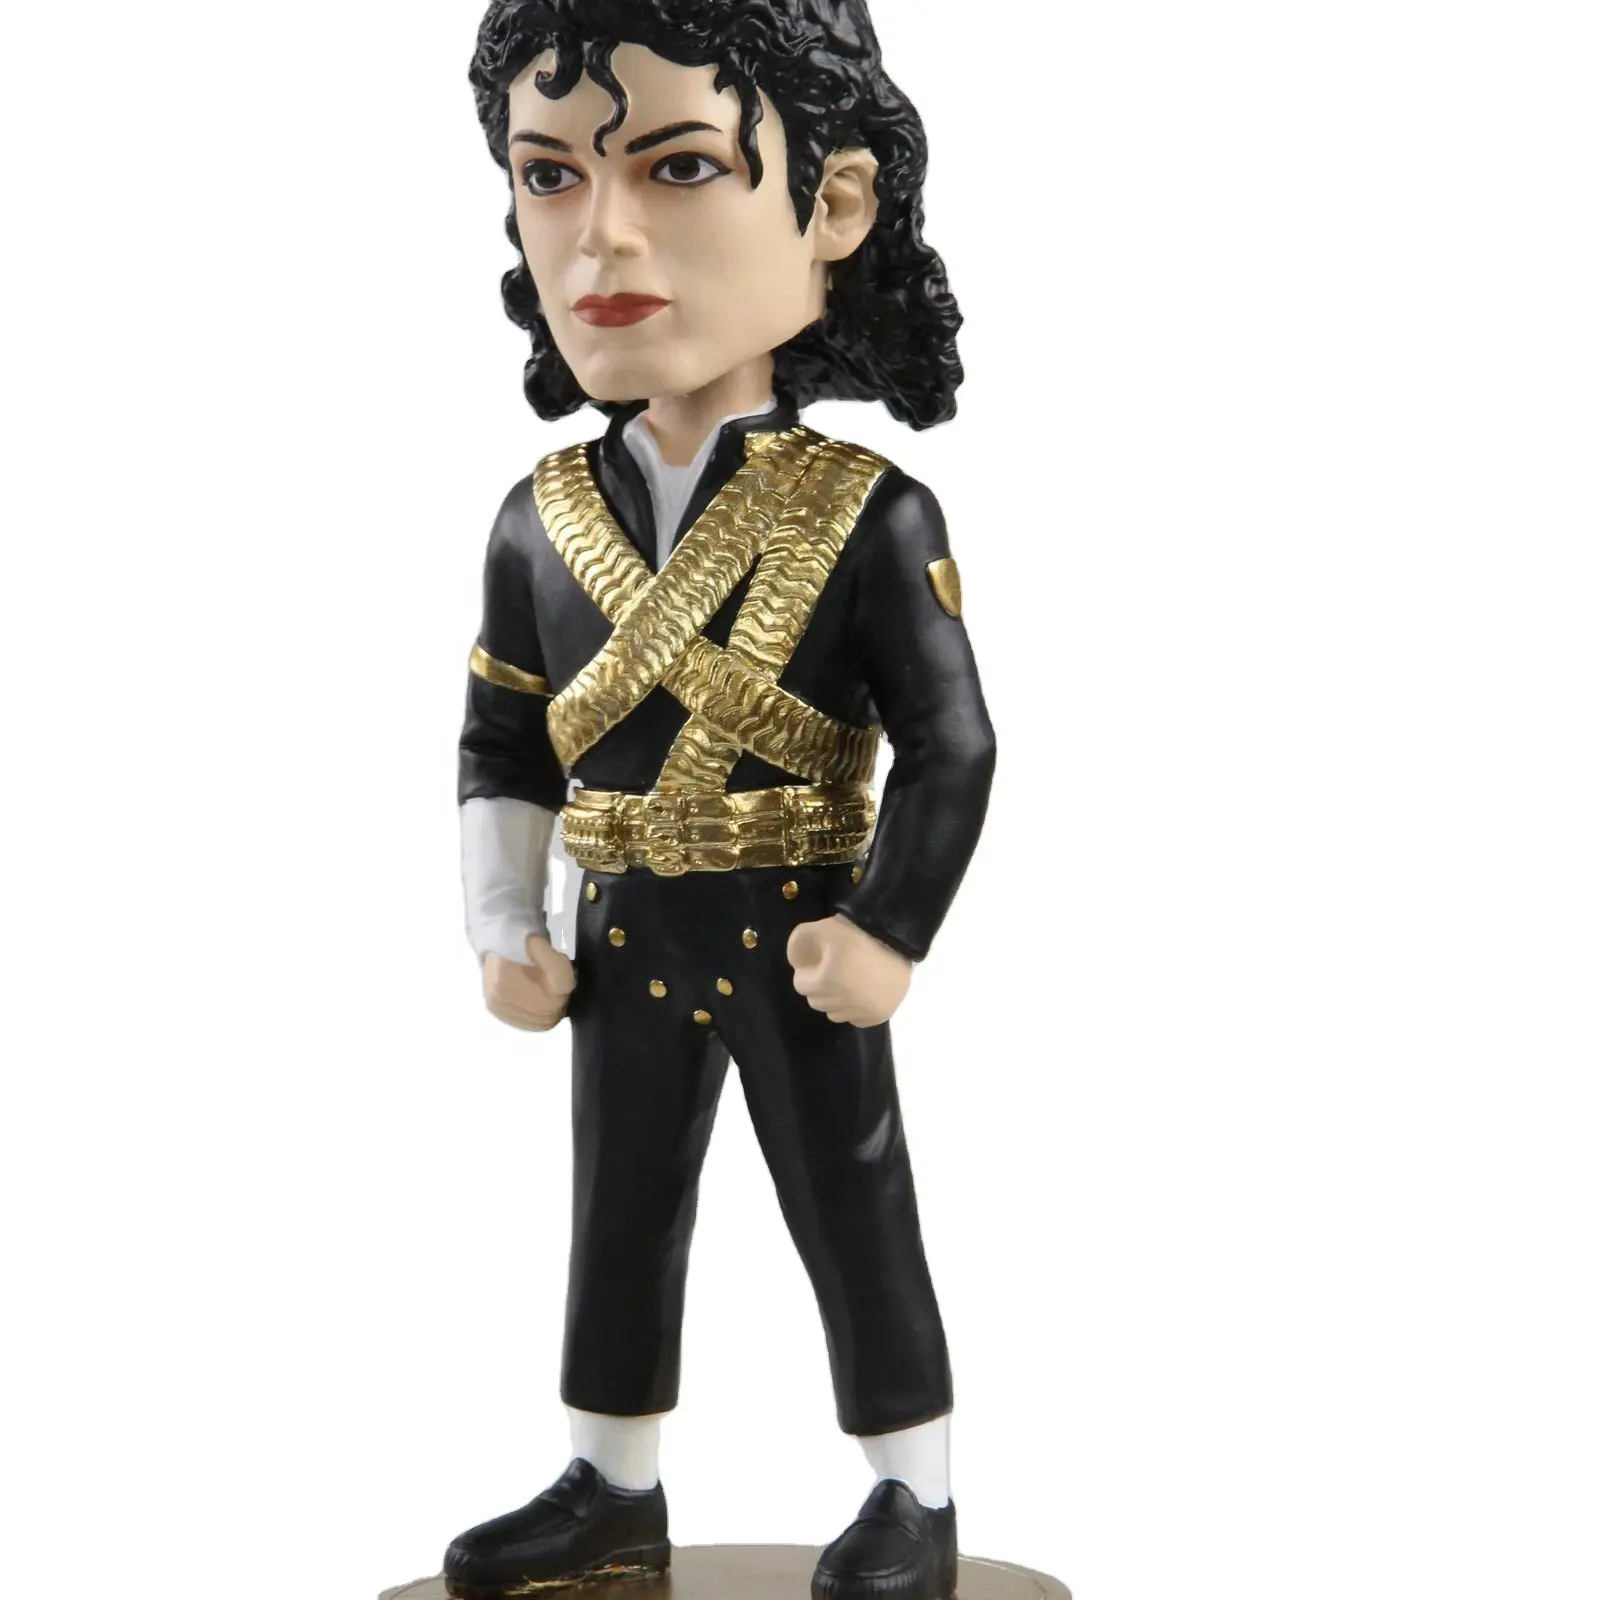 famous Movie Character MJ resin dancing statue doll singer Michael Jackson resprin March expo 2021